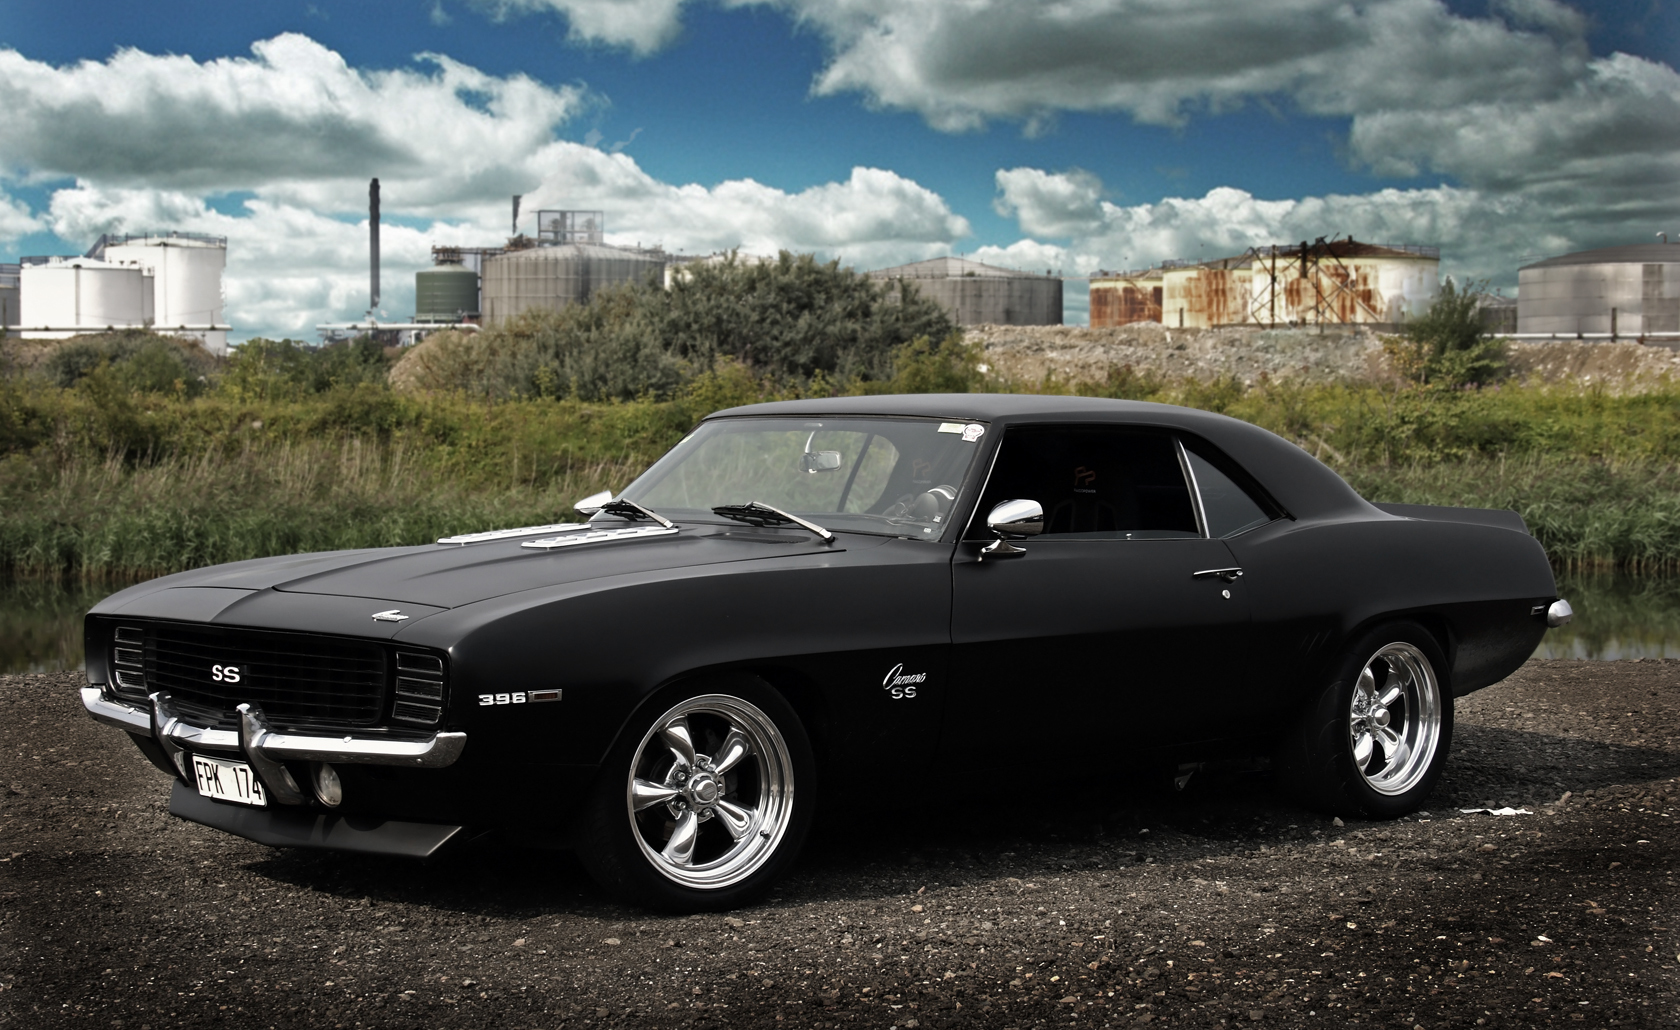 Muscle  Wallpapers on Muscle Cars Chevrolet Camaro Ss Hd Wallpaper   Cars   Trucks   715511